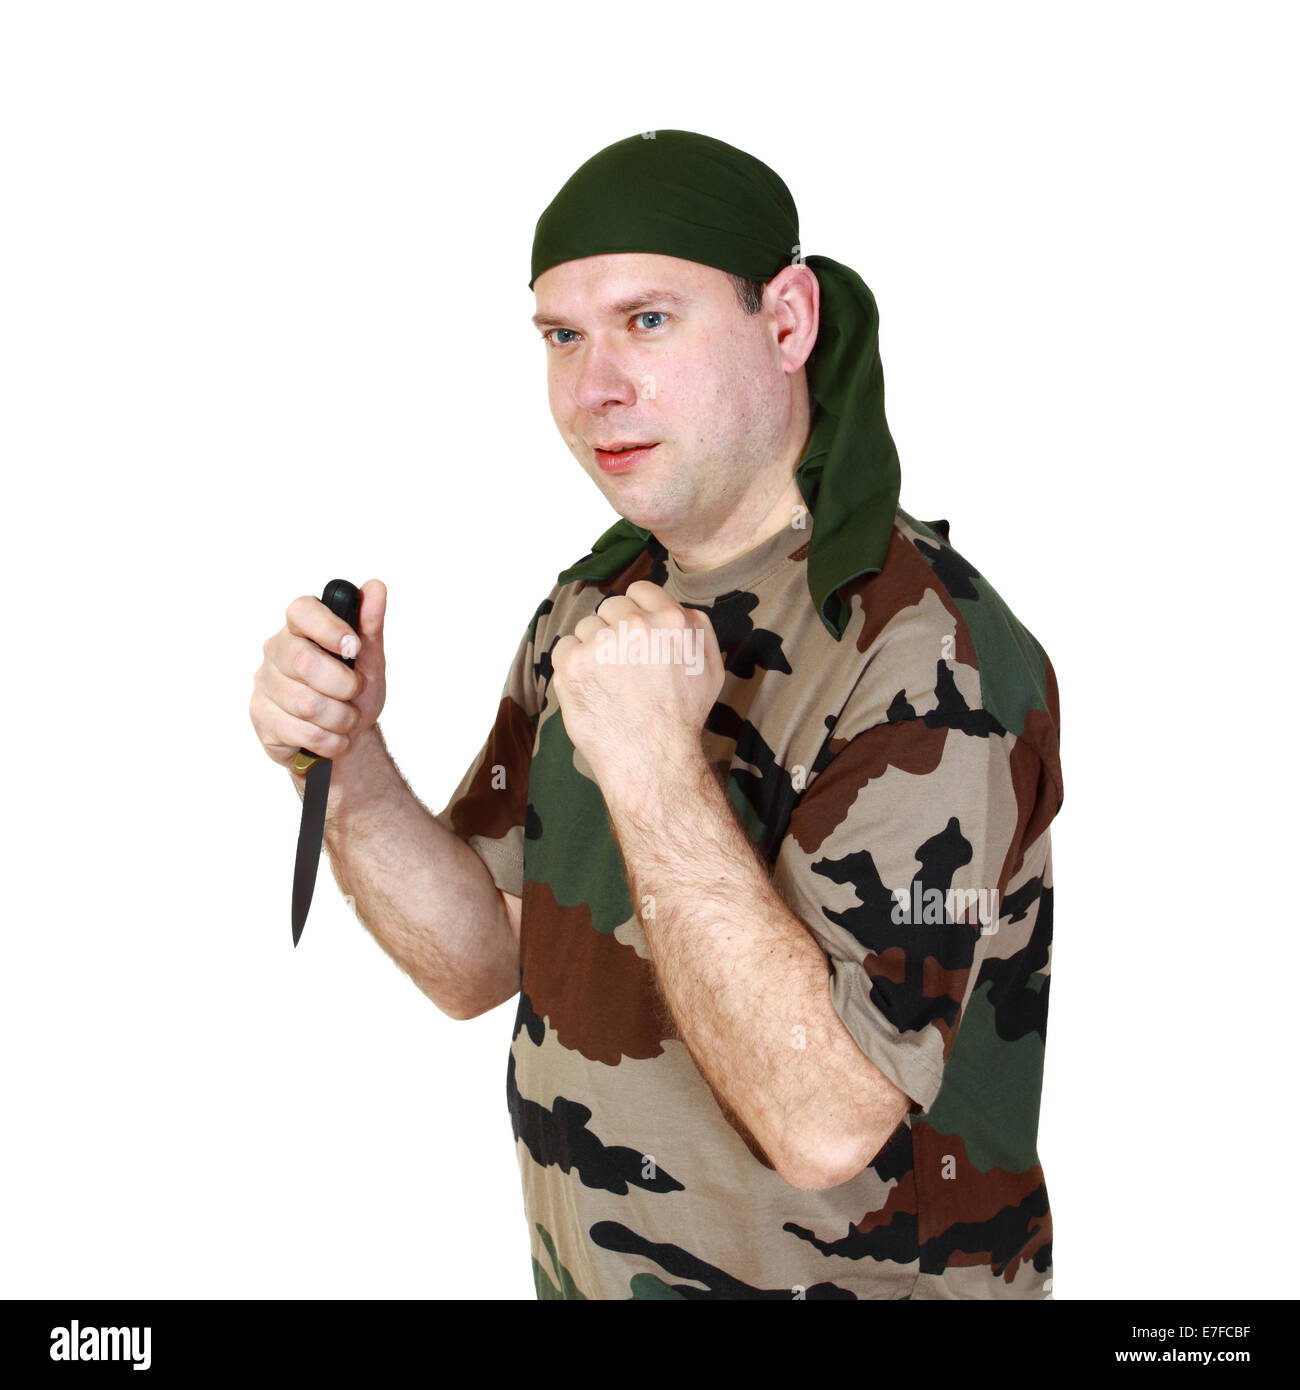 Man in camouflage with knife in hand stands in a fighting stance. Isolated on white background Stock Photo